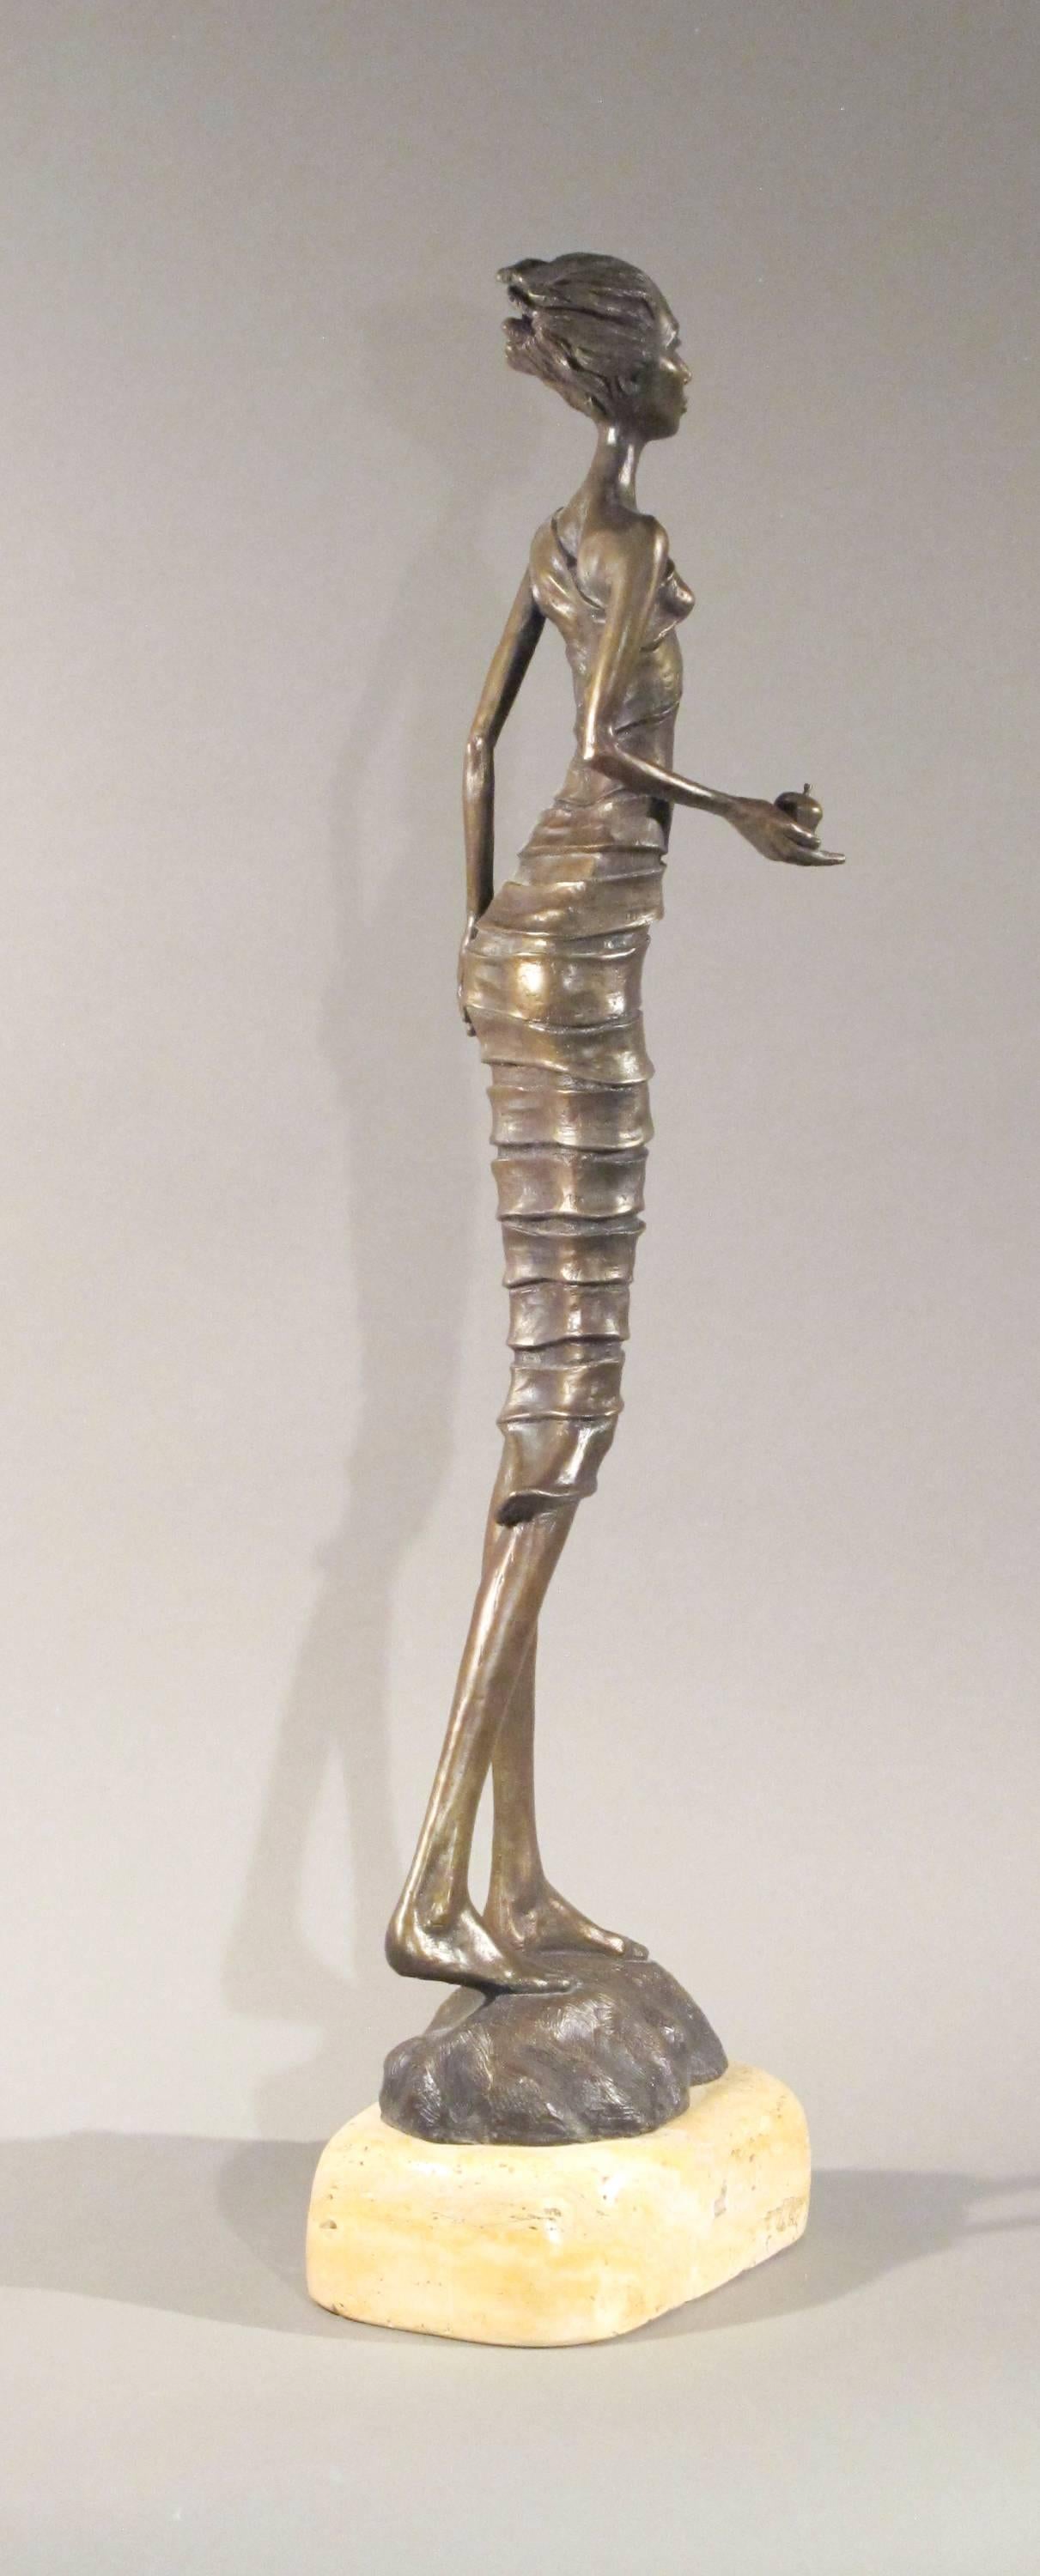 First Bite, female figure holding apple, garden of eden, bronze sculpture Williams - Contemporary Mixed Media Art by Troy Williams